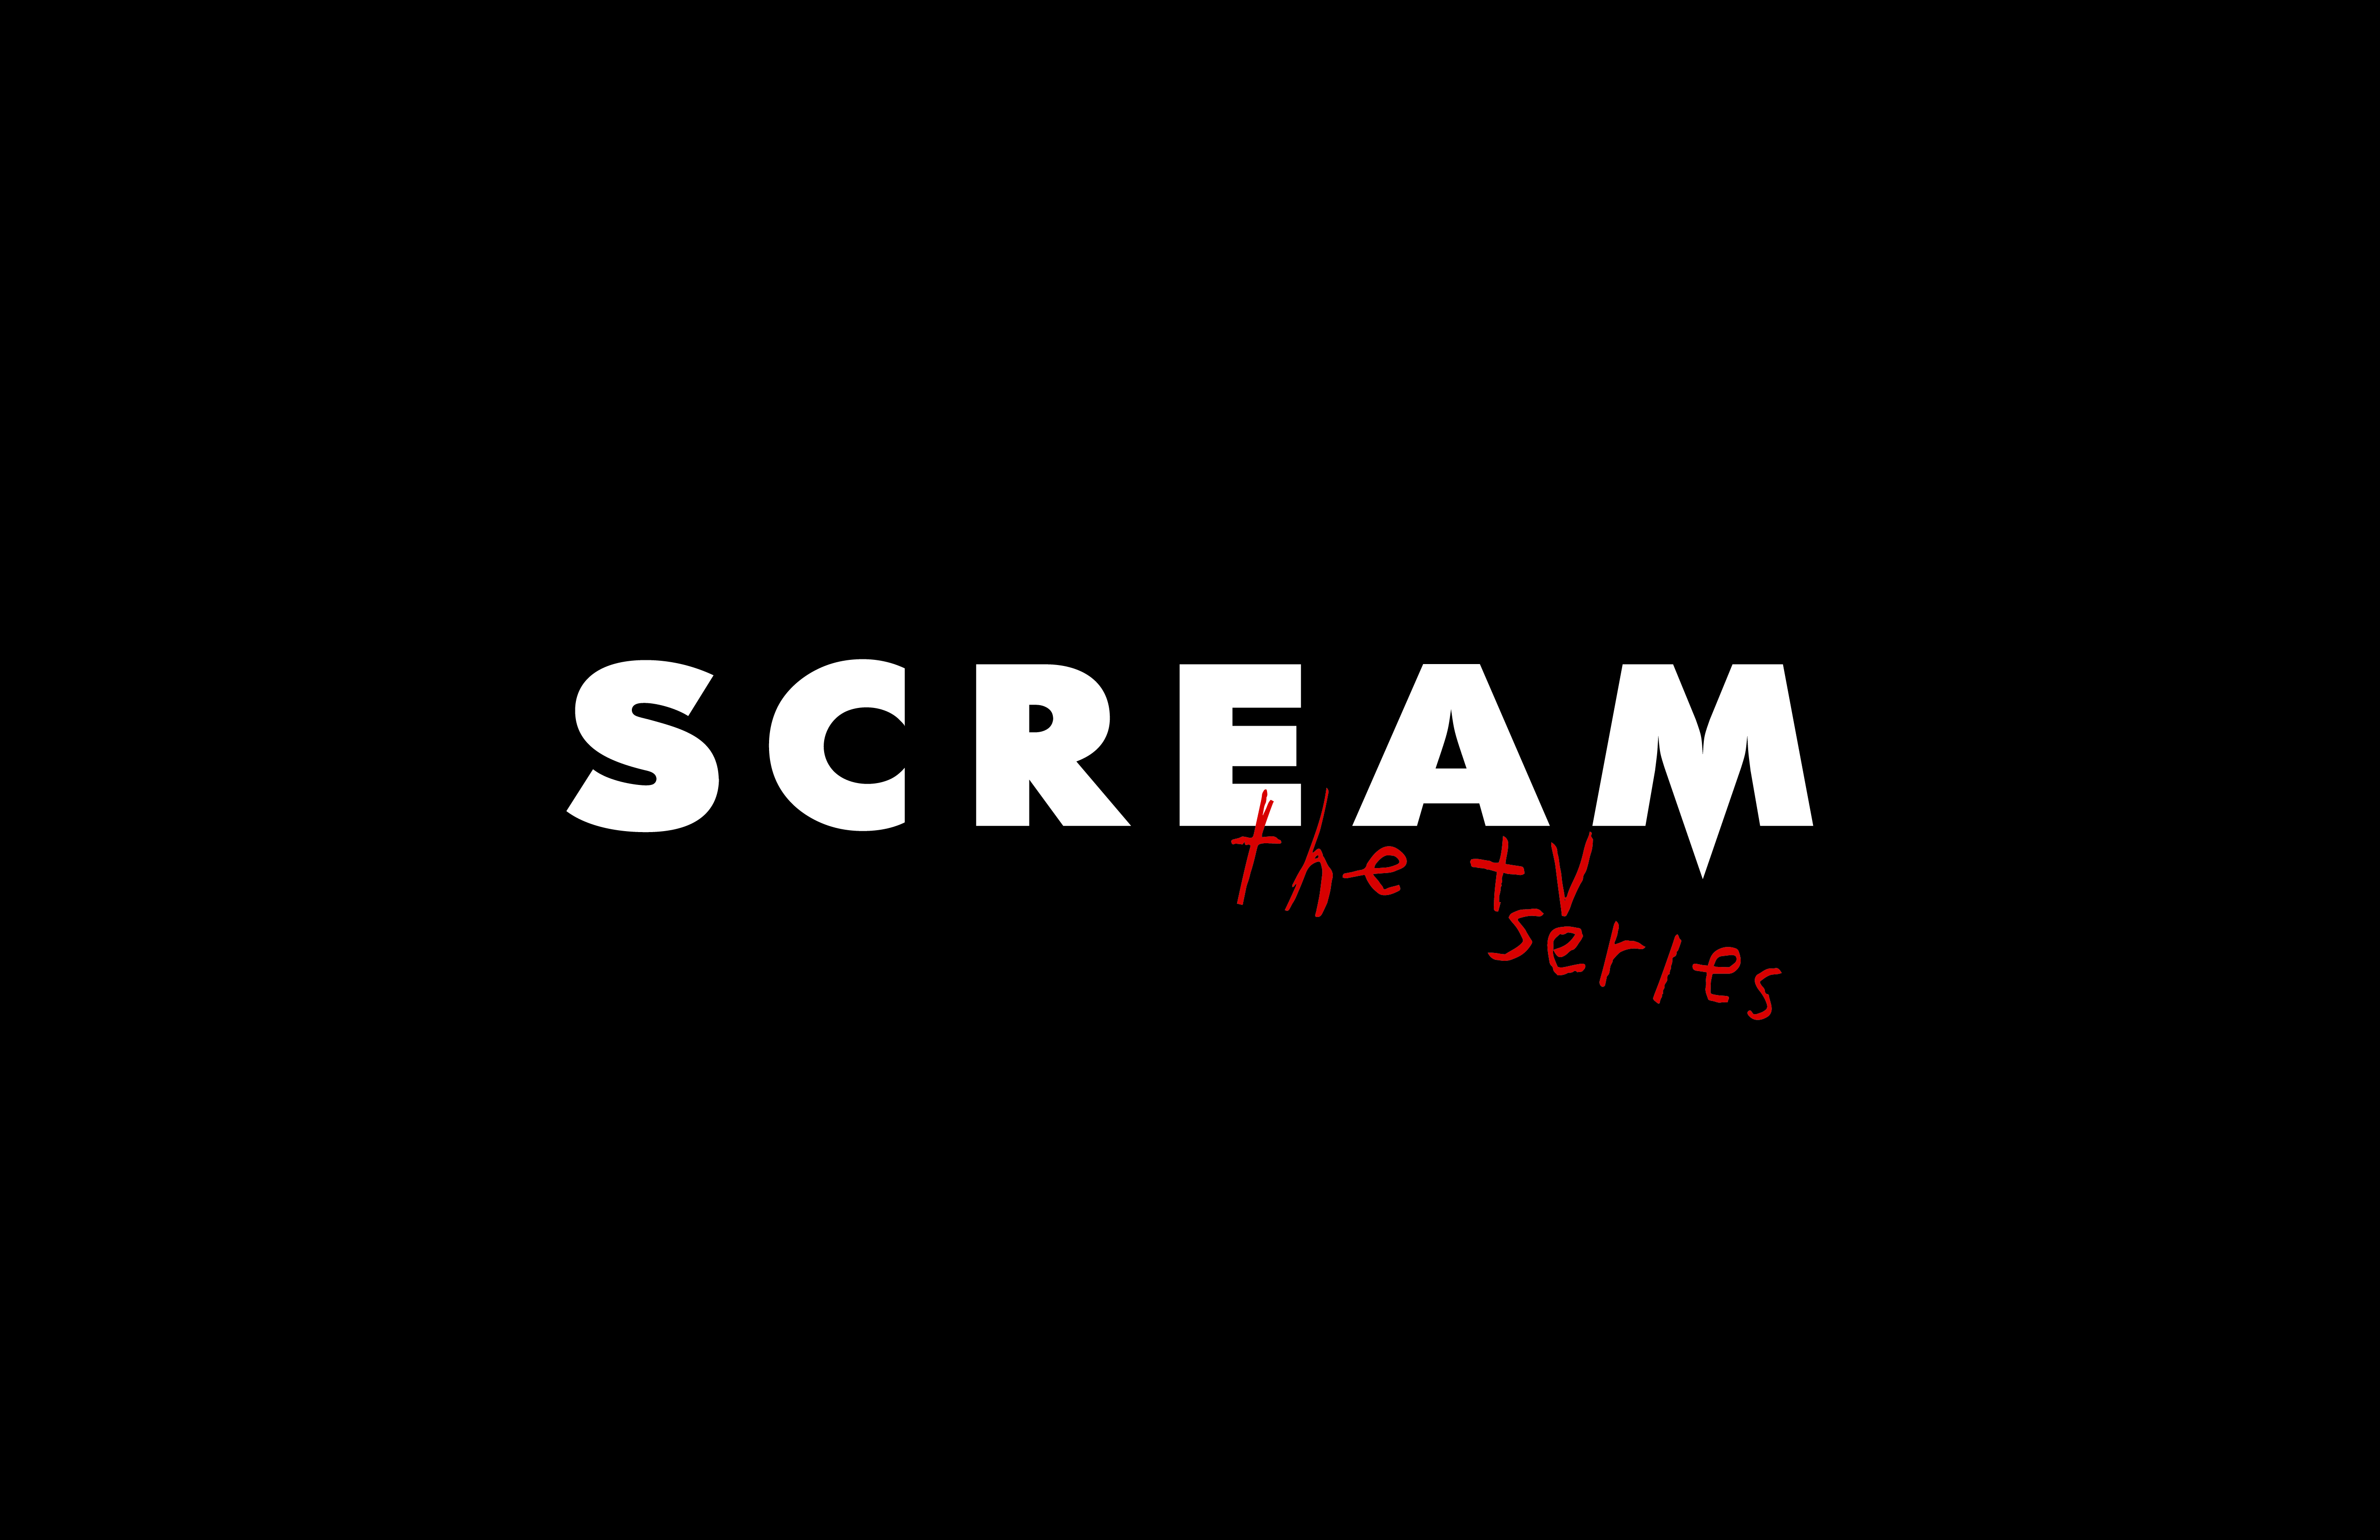 Scream 2.07- “Let the Right One In”